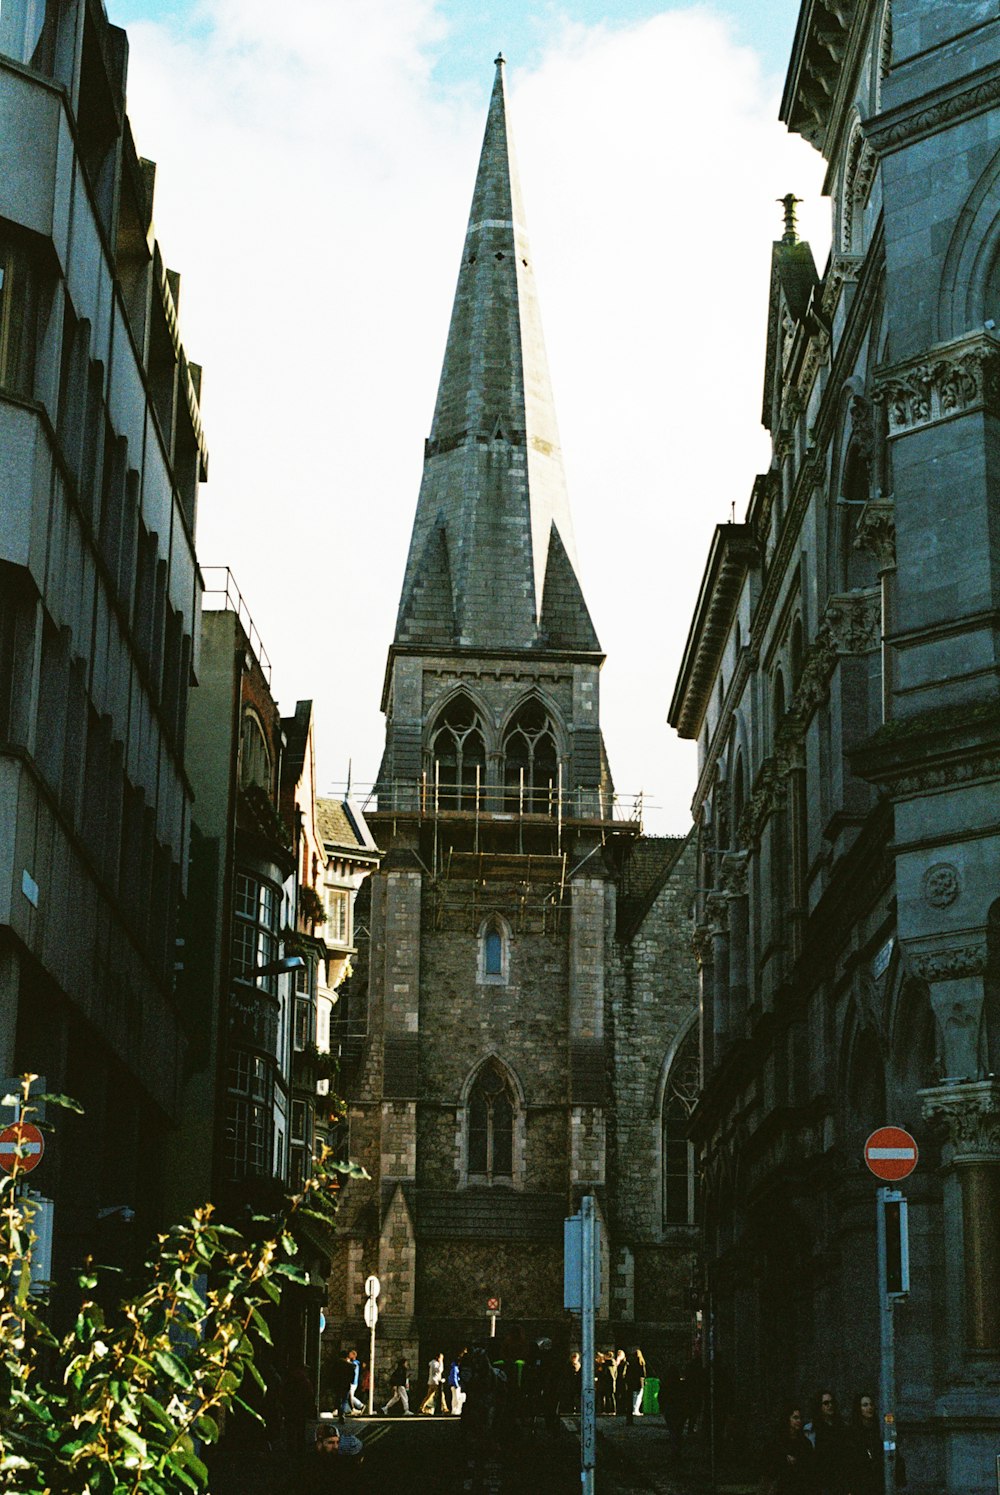 an old church with a steeple in the middle of a city